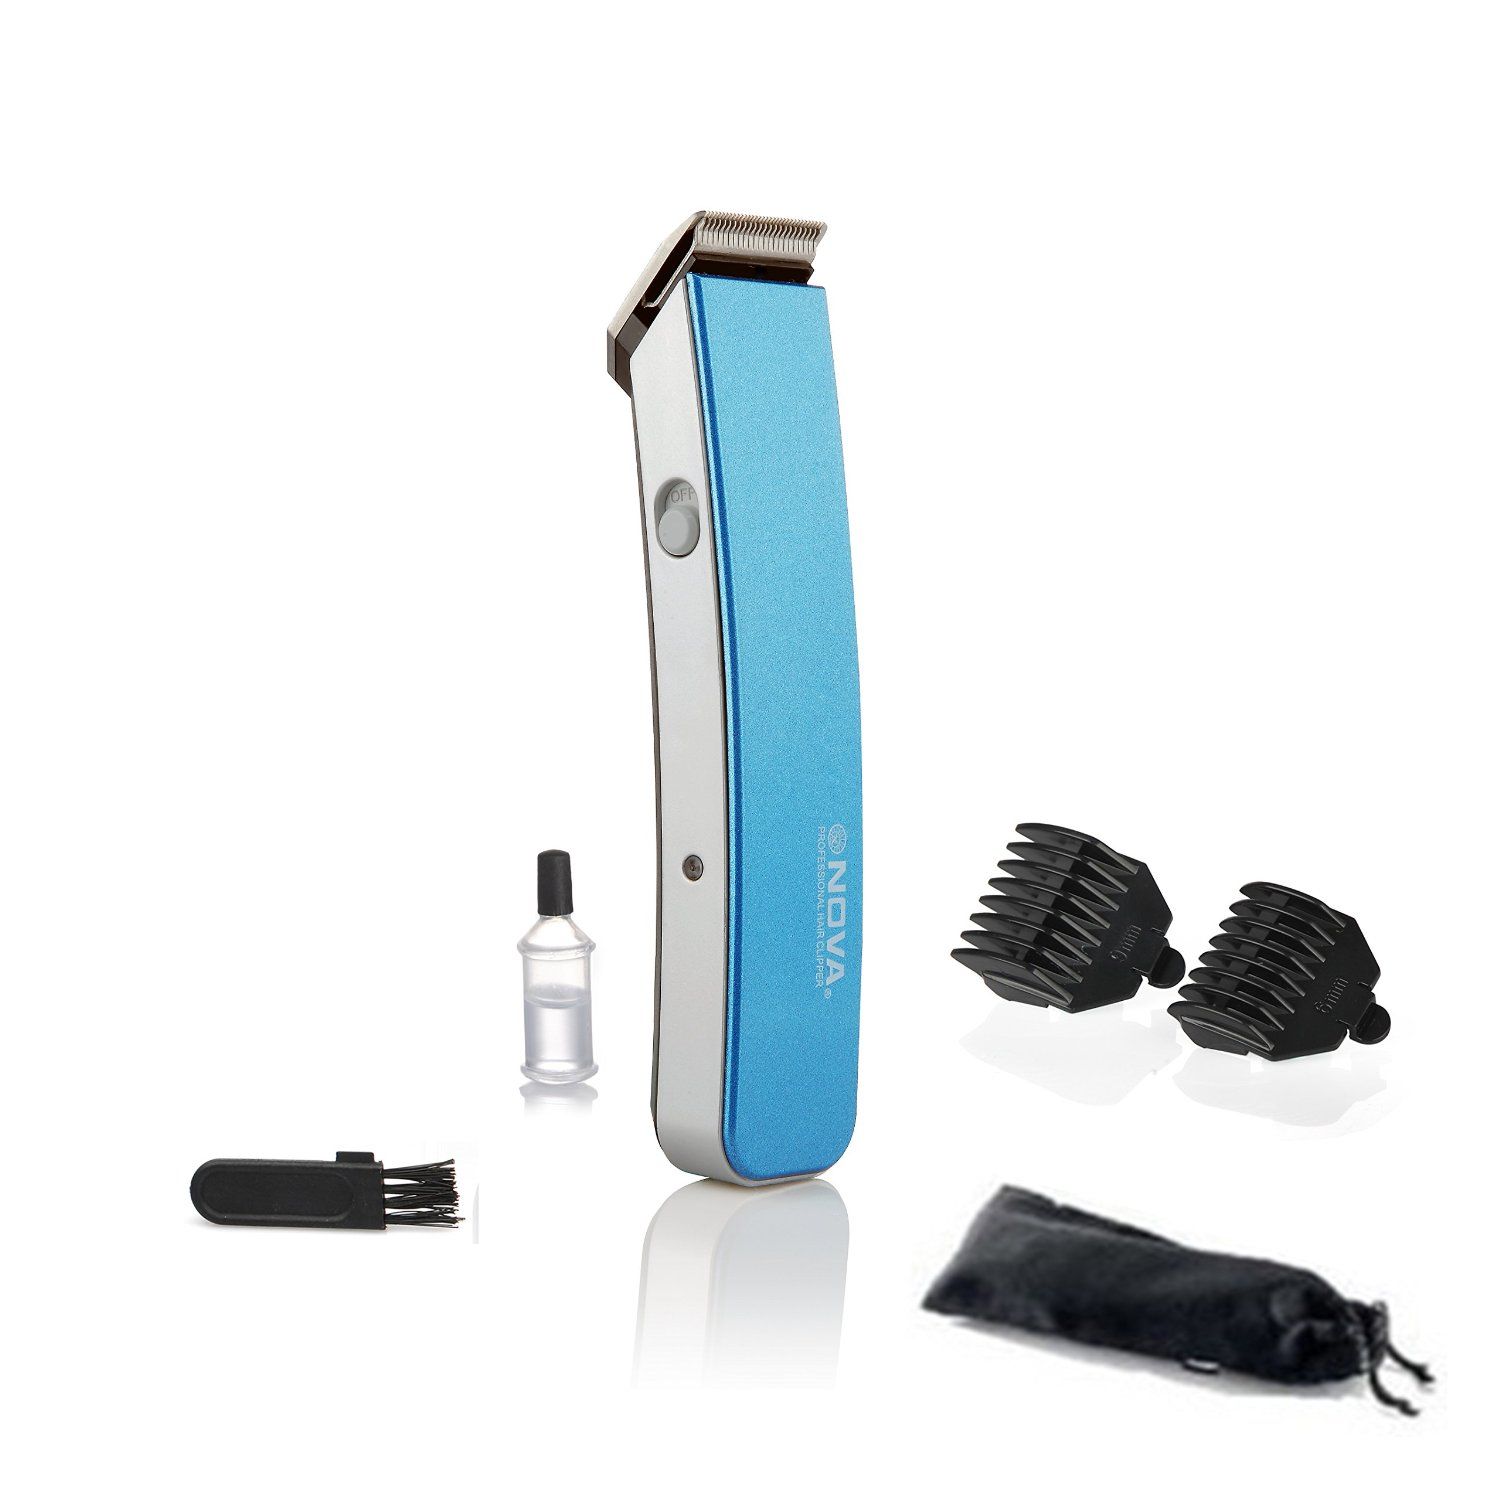 Nova NHT-1045 Rechargeable Cordless , 30 Minutes Runtime Beard Trimmer for Men (Blue)